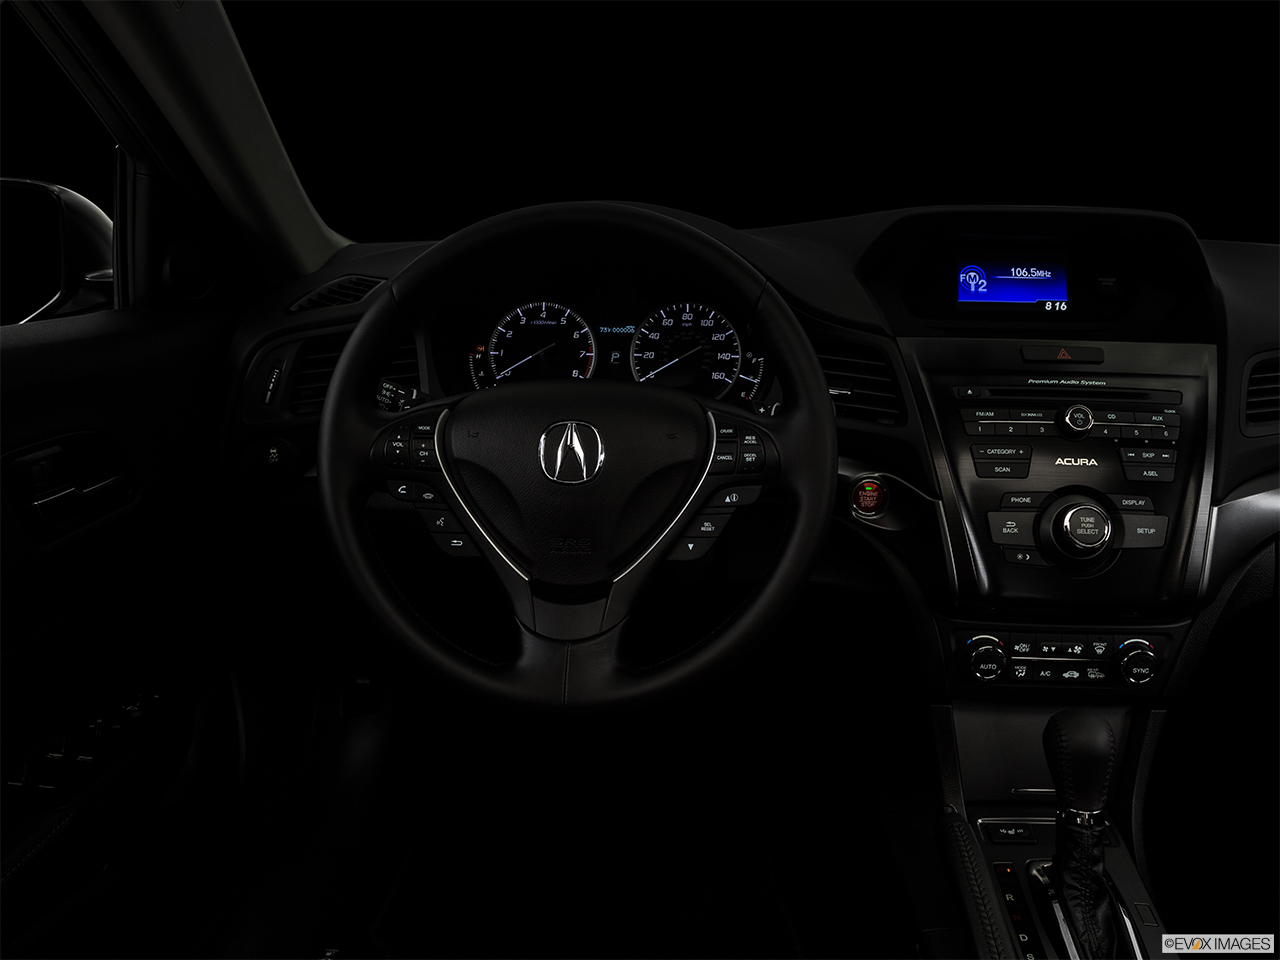 2015 Acura ILX 5-Speed Automatic Centered wide dash shot - "night" shot. 